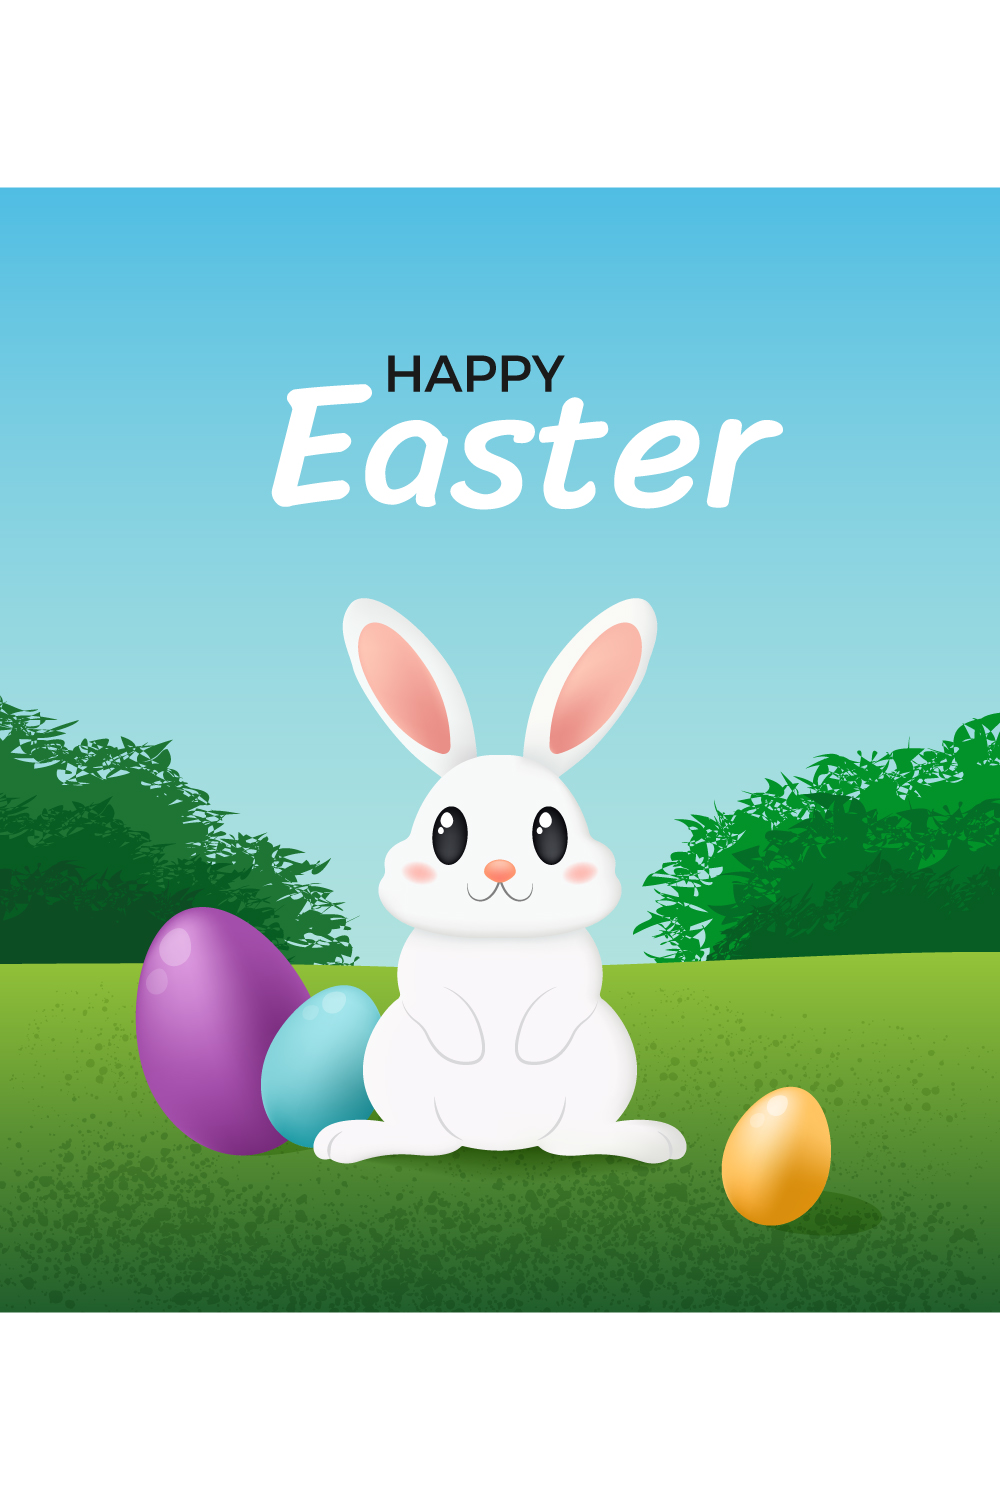 Set of Happy Easter banners with cute white bunny and eggs Vector illustration with cartoon rabbit on green field pinterest preview image.